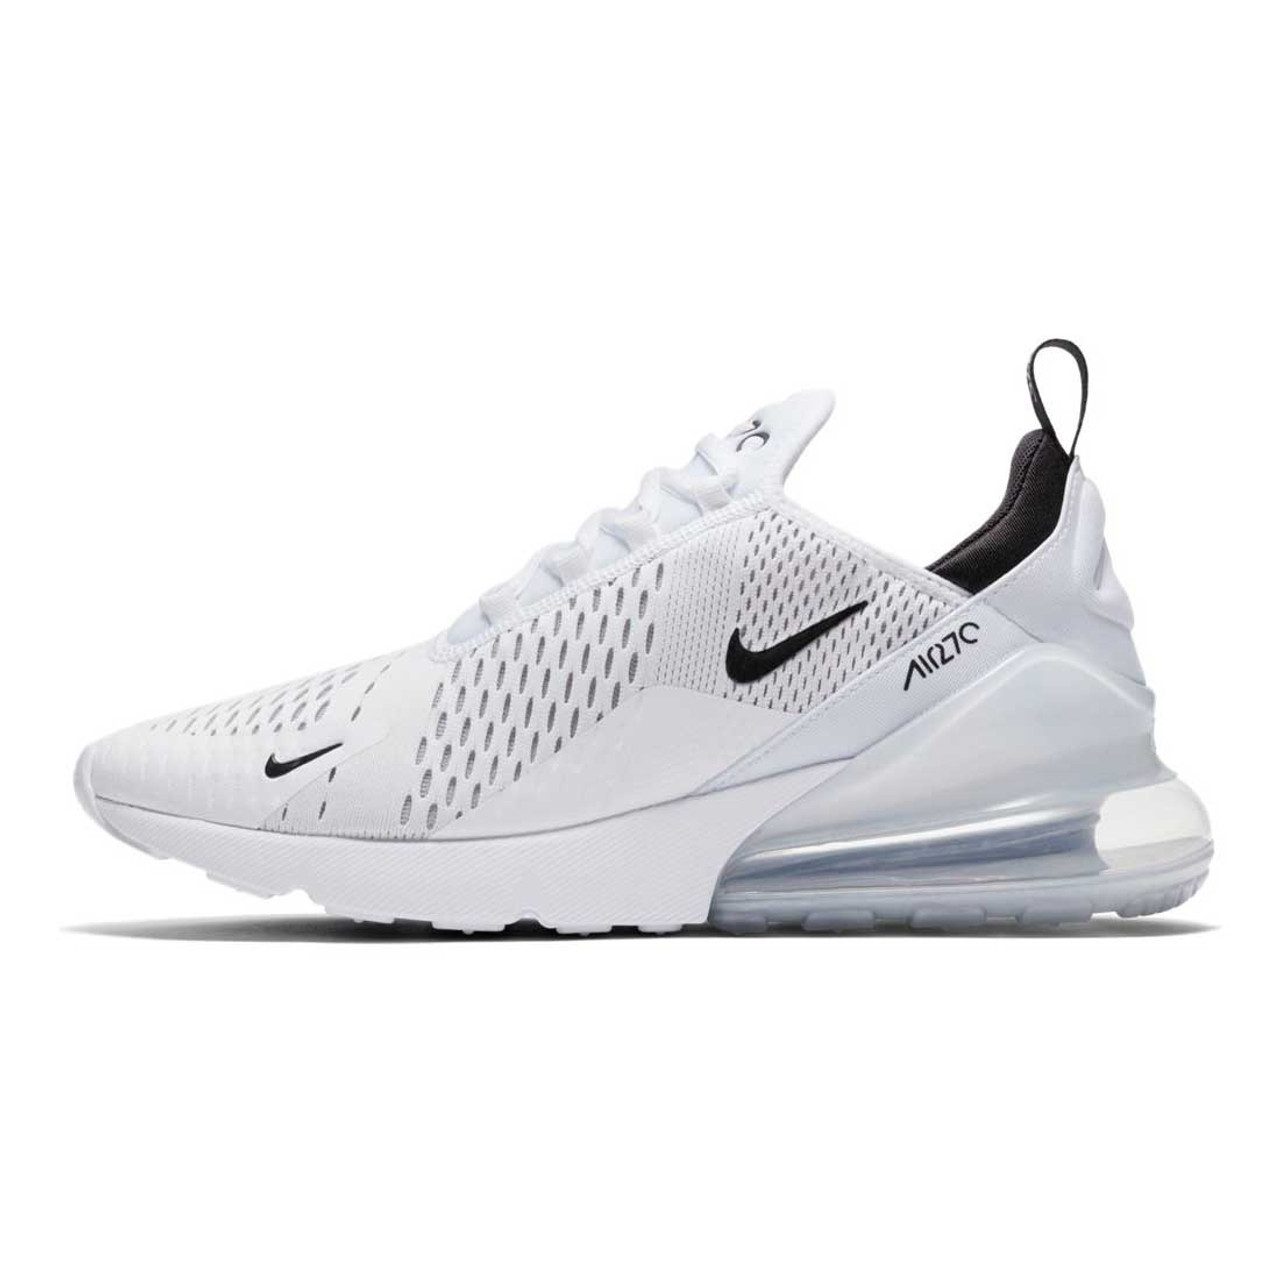 JECR'S | Nike Men's White/Black Air Max 270 Shoes $ 159.99 | nike air zoom grade background